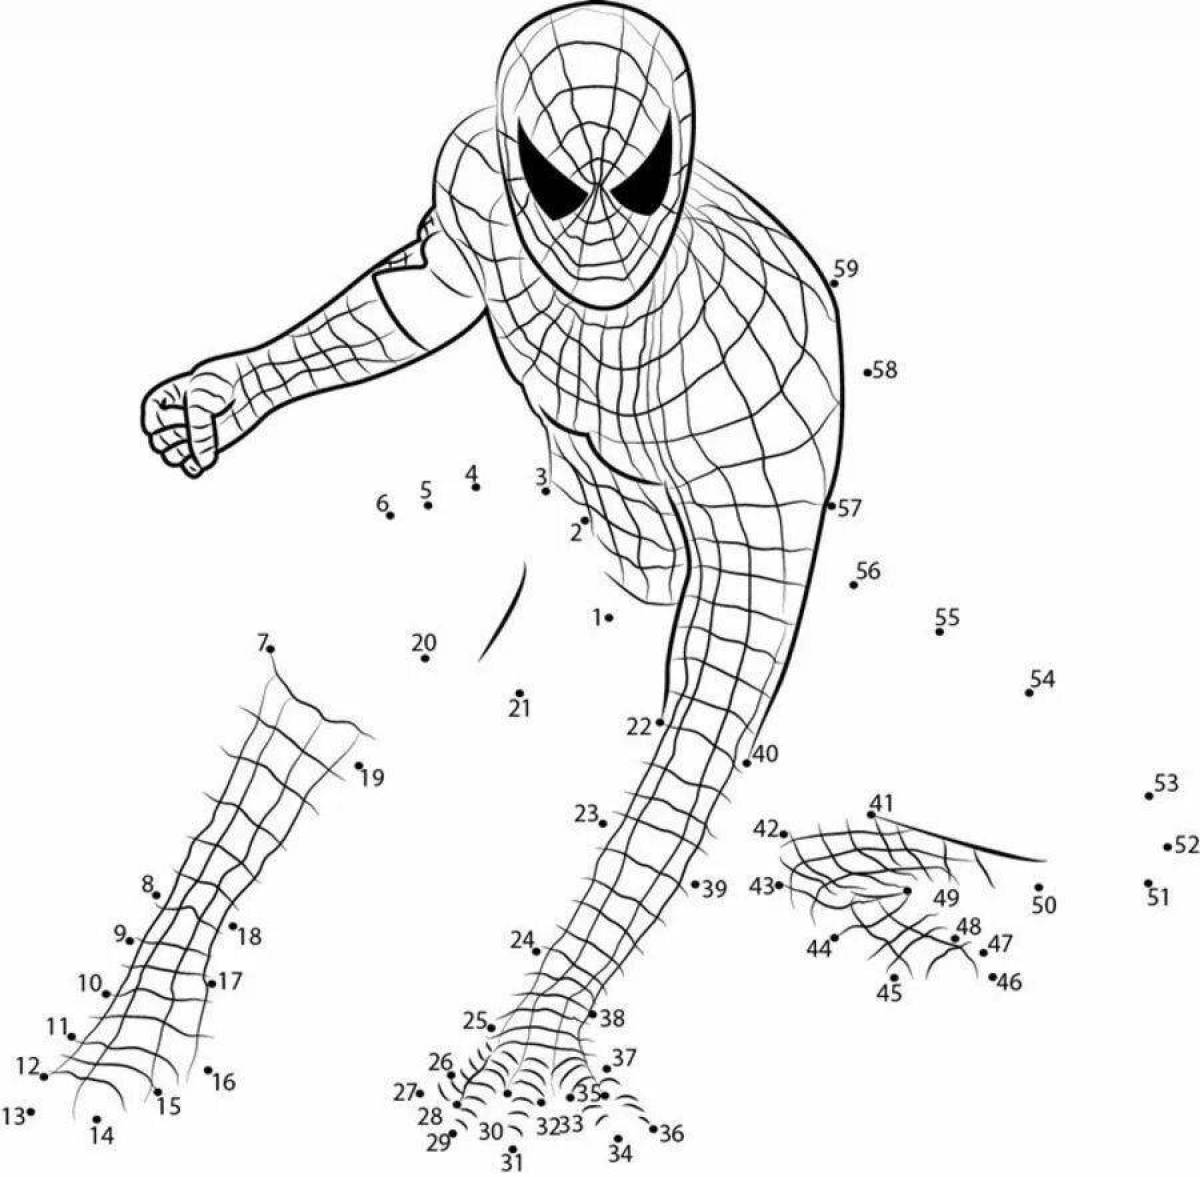 Colorful spiderman by numbers coloring book